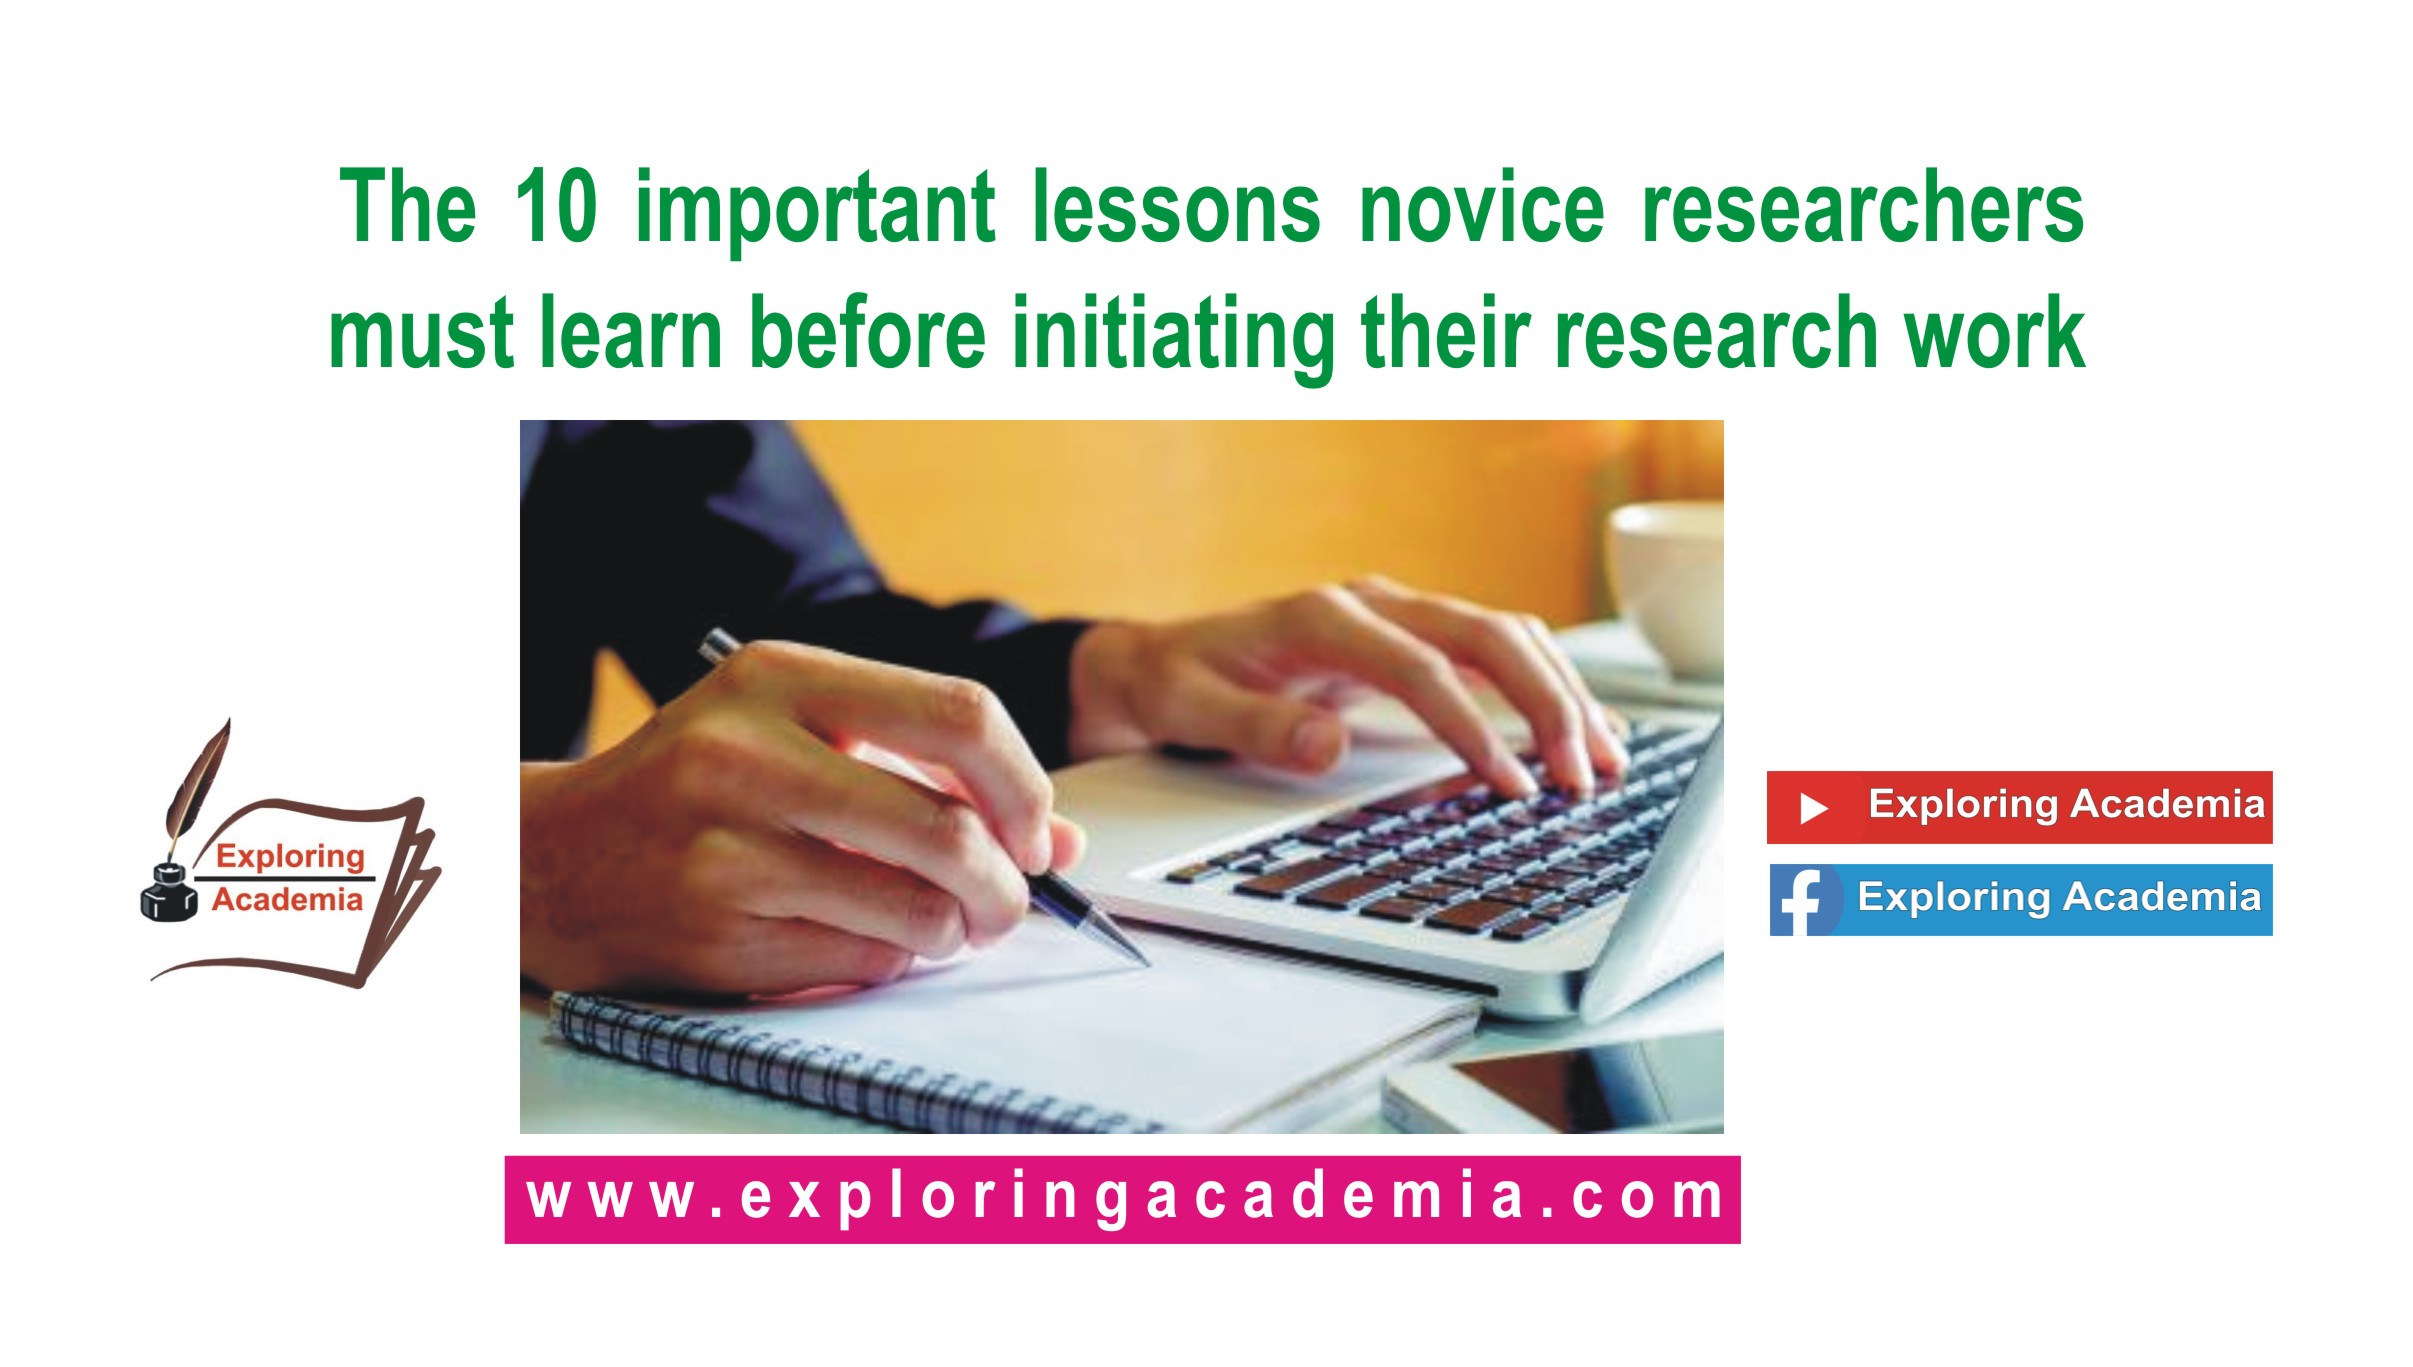 The 10 important lessons novice researchers must learn before initiating their research work